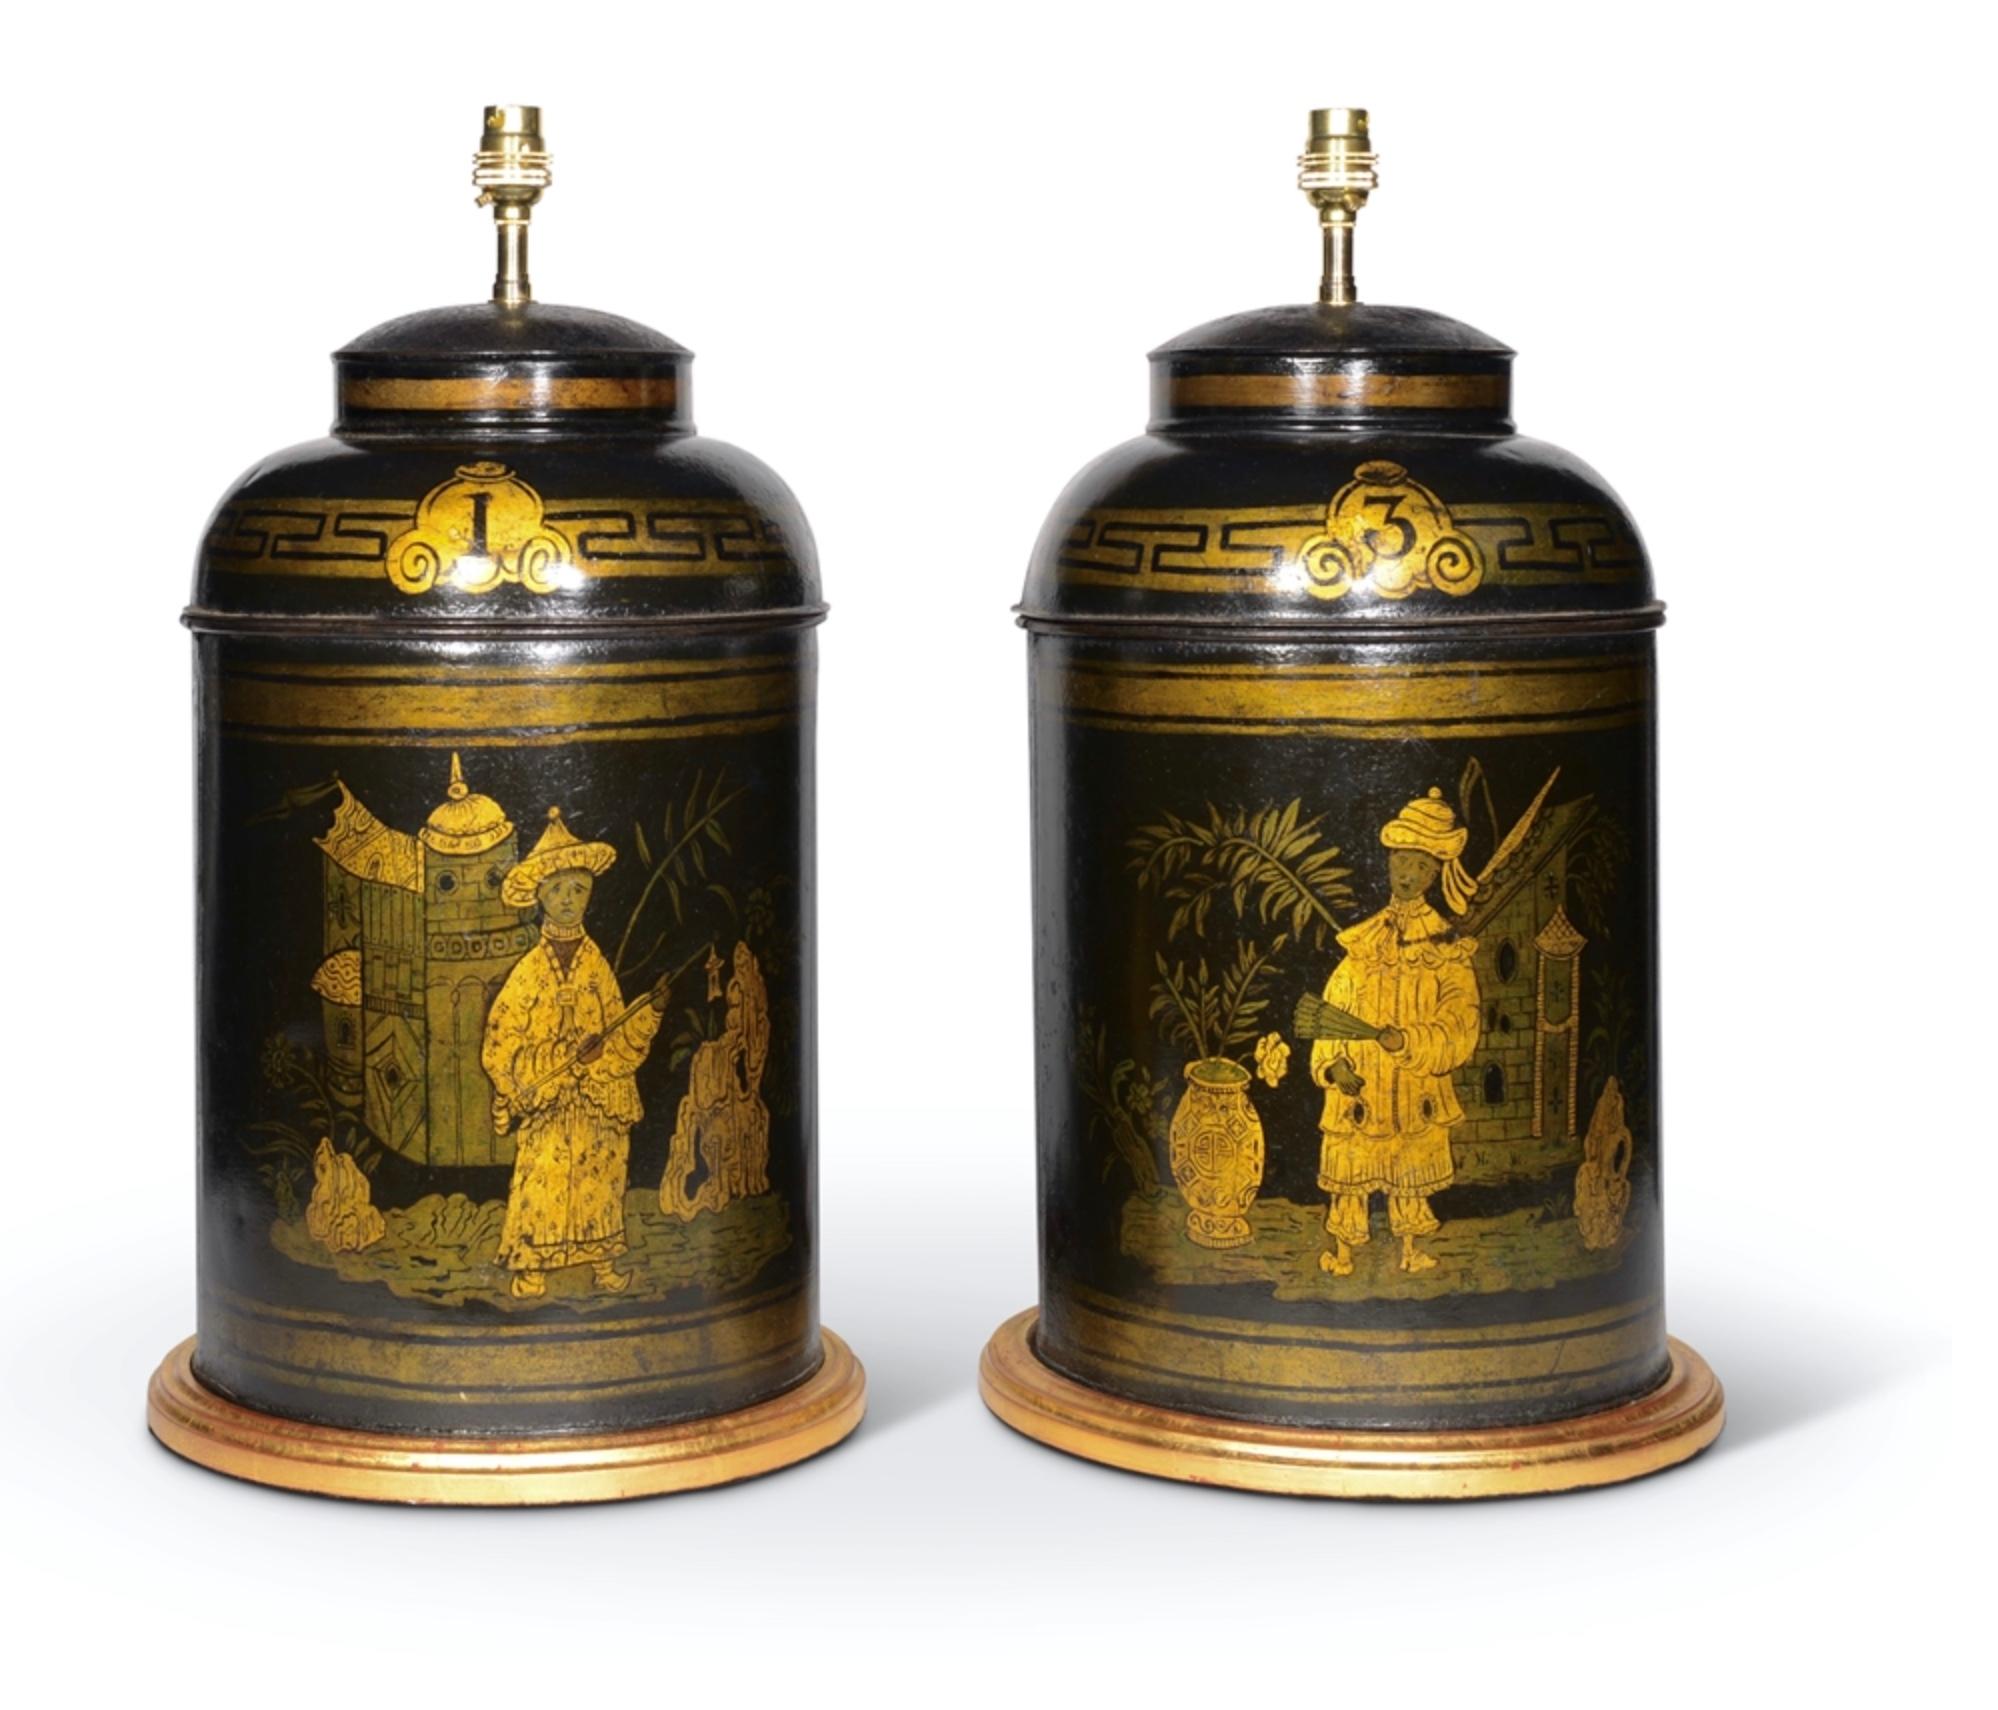 A fine pair of Regency period early 19th century lidded and numbered tole tea canisters decorated with chinoiserie figures and motifs in gilded highlights on a black japanned ground. Now mounted as lamps with hand gilded turned bases.

Height of